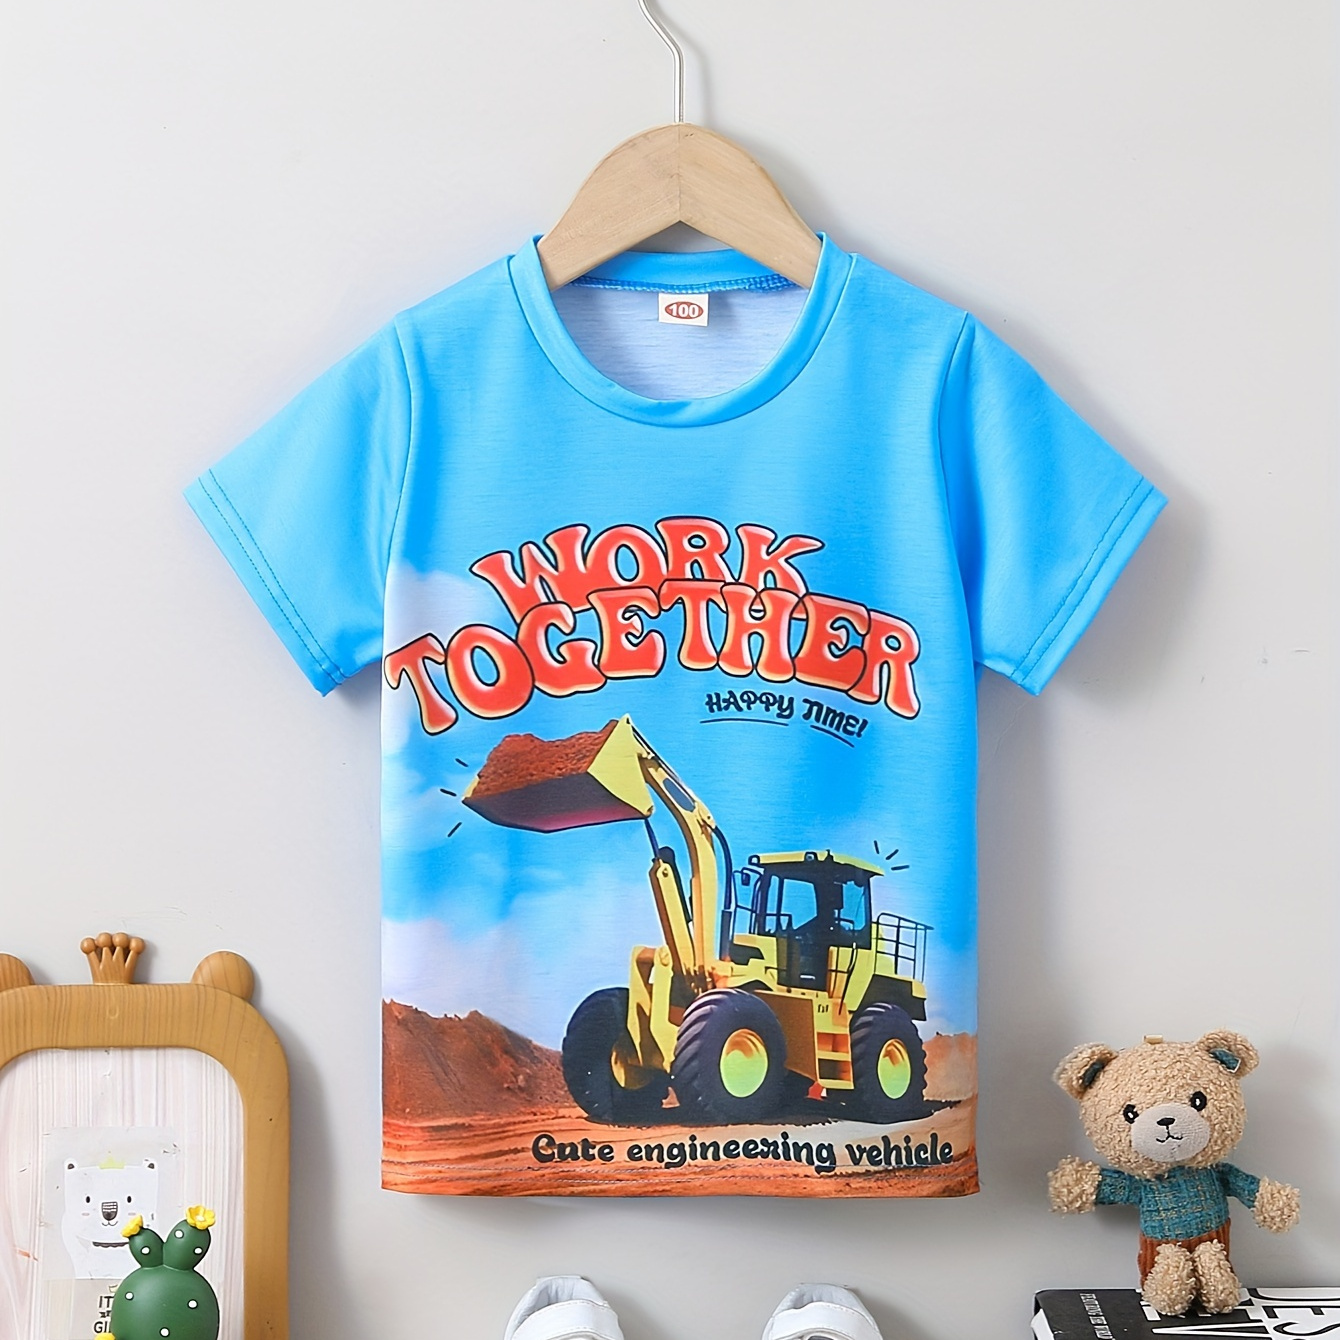 

Work Together And Excavator 3d Print Crew Neck T-shirt, Short Sleeve Casual Comfy Summer Tee Tops For Boys